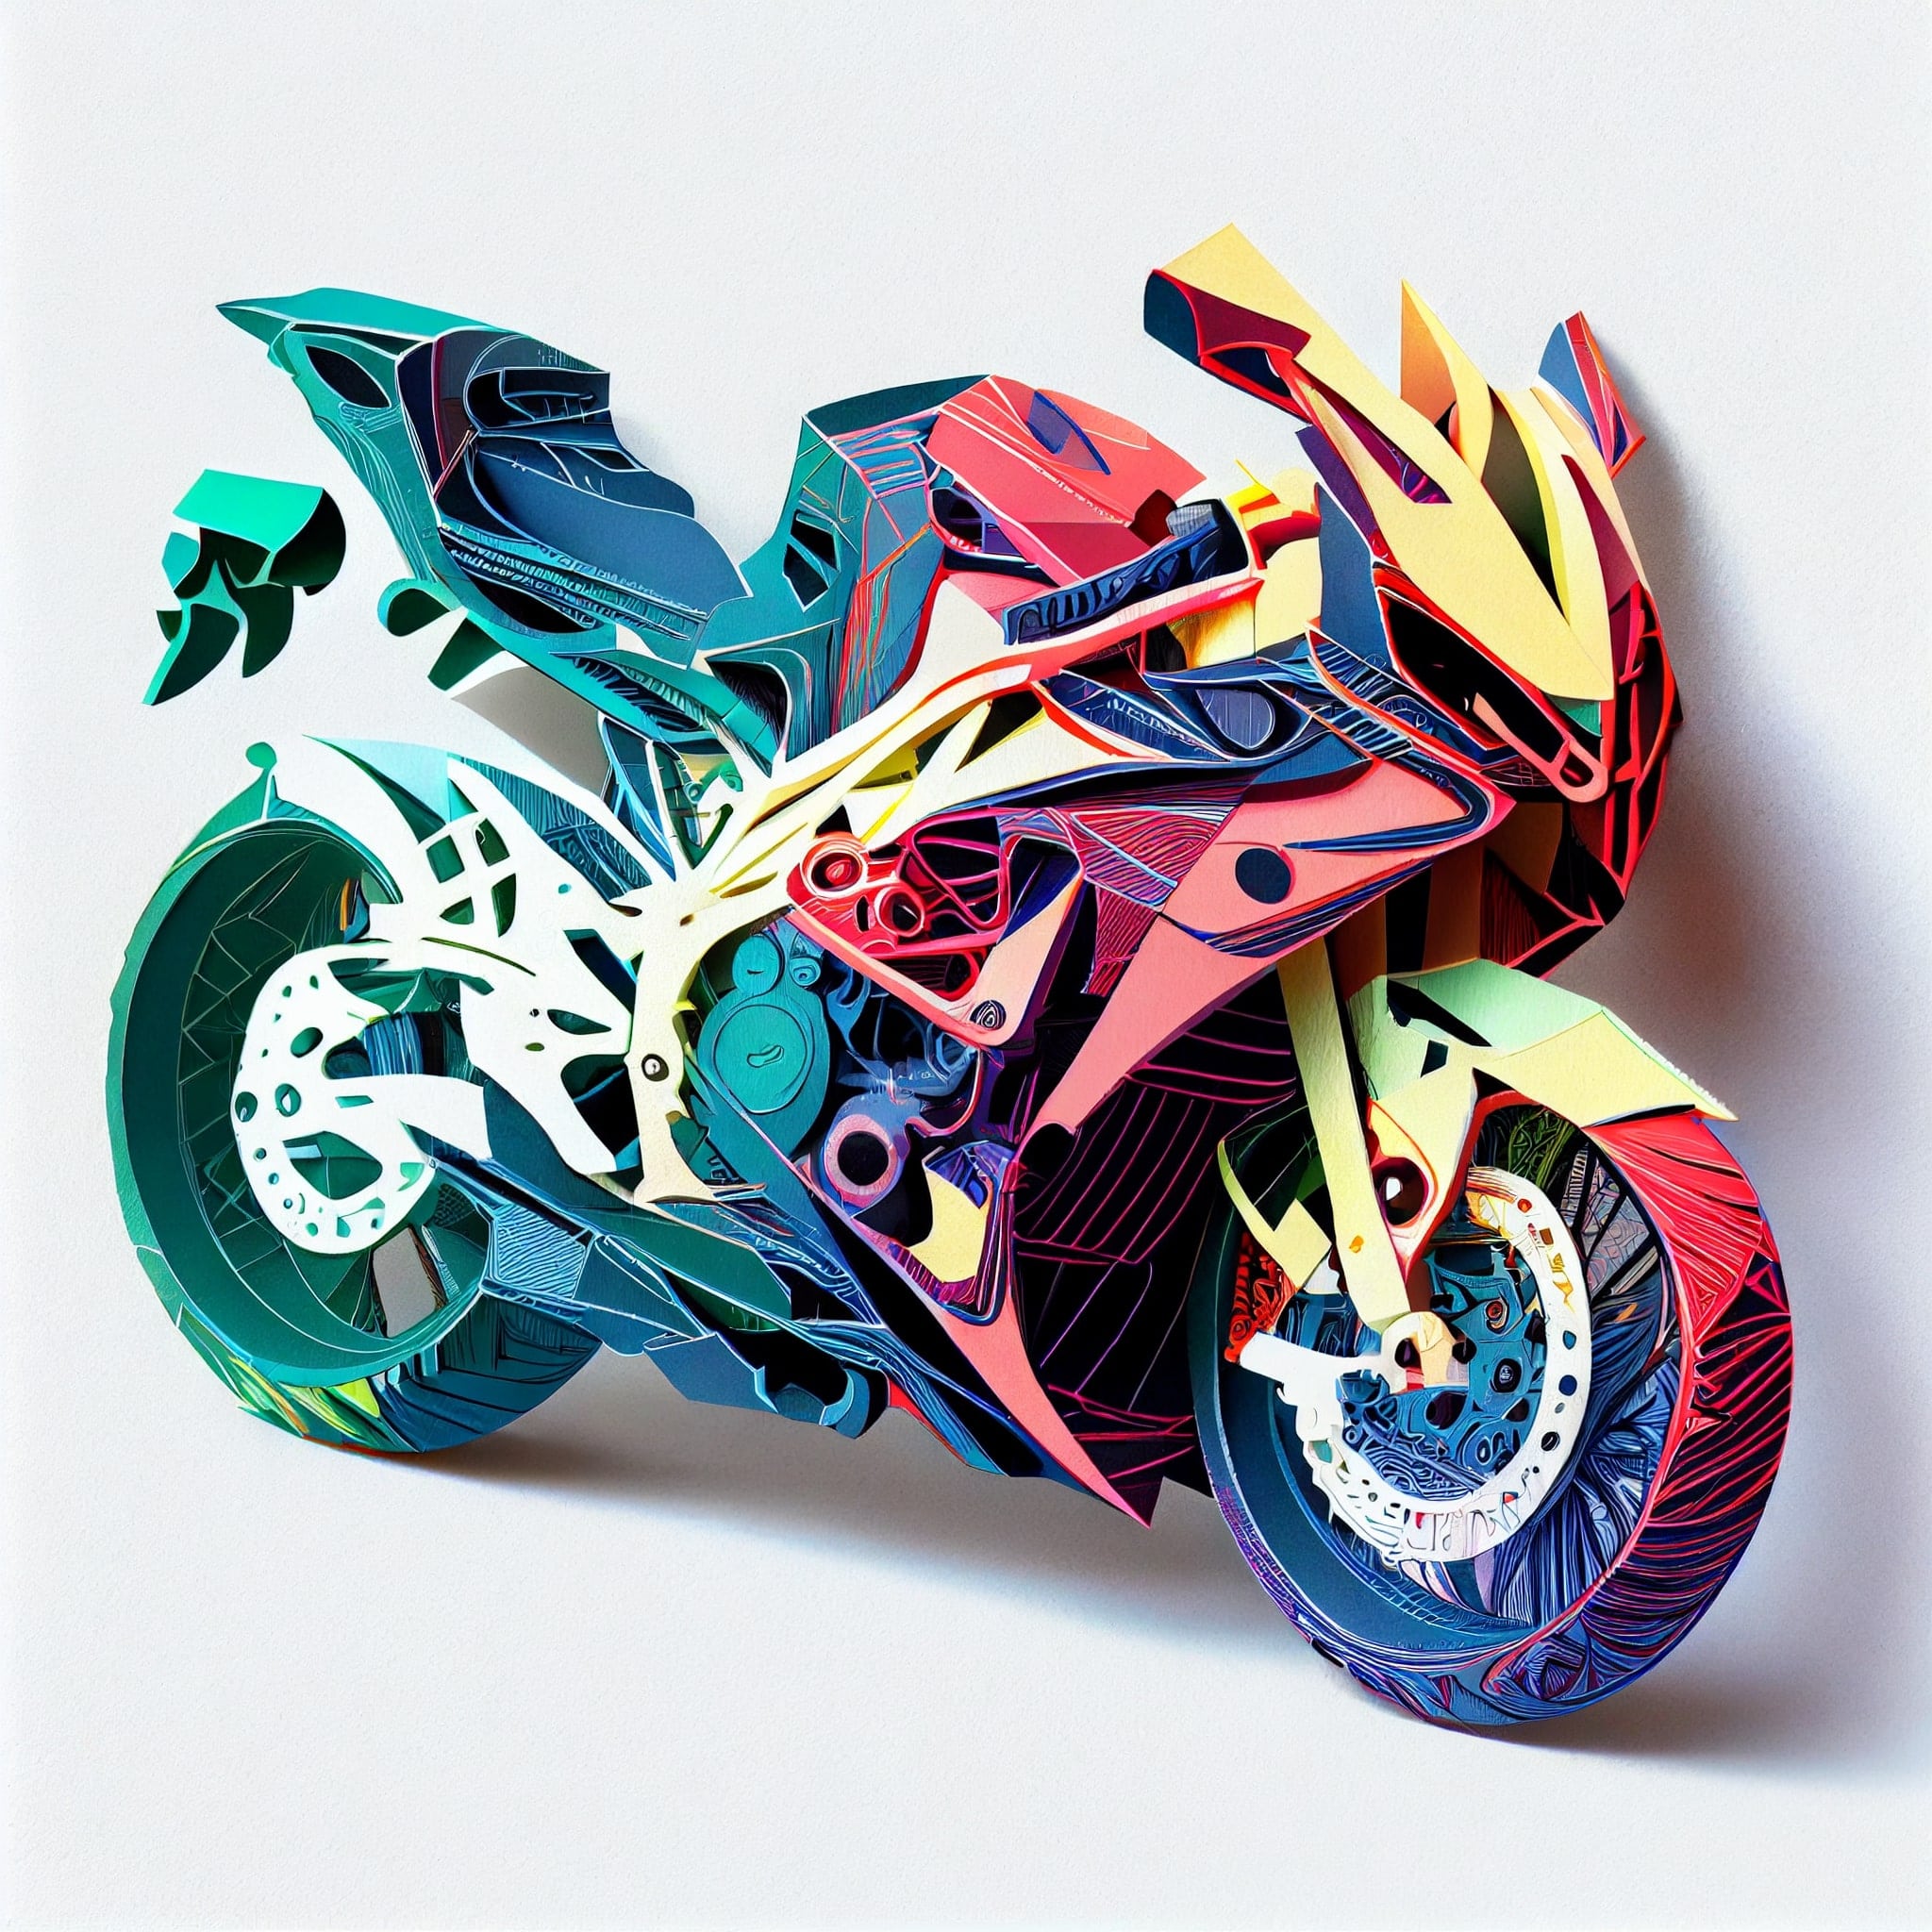 Paper model of a motorcycle on a white background.